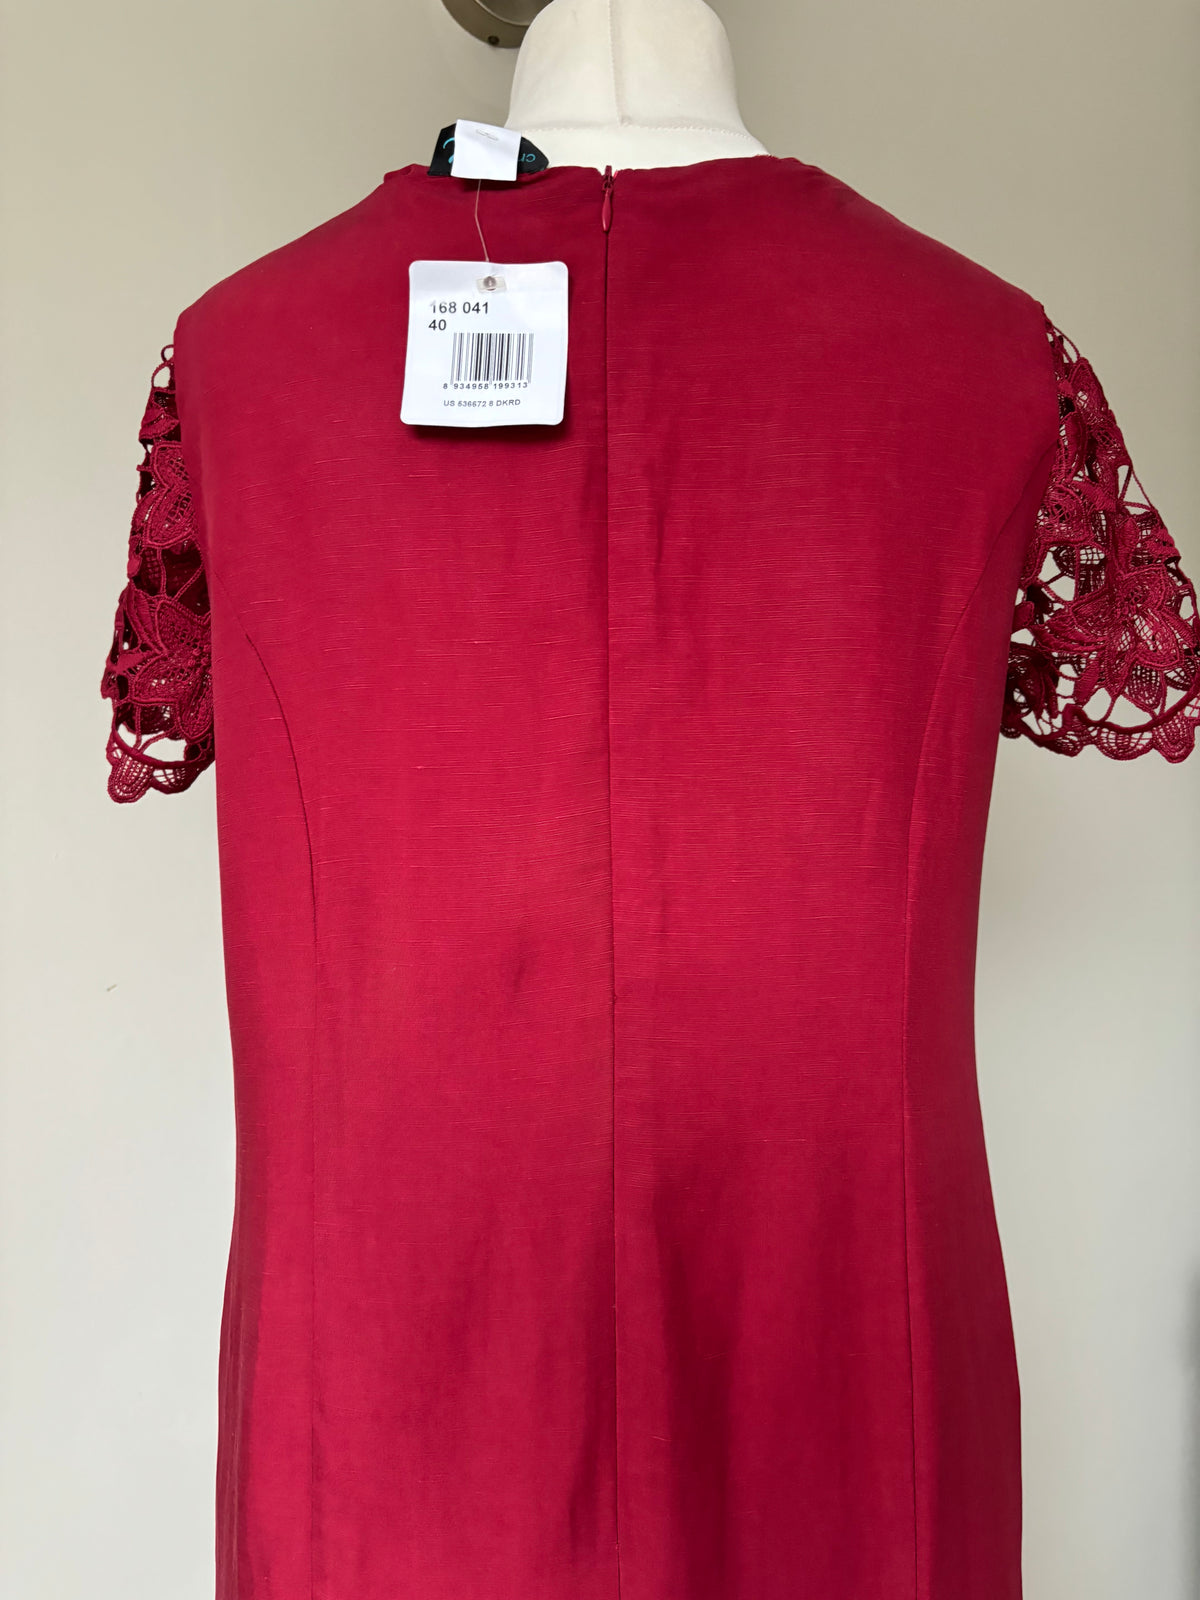 Red Lace Summer Dress by CREATION - Size 14